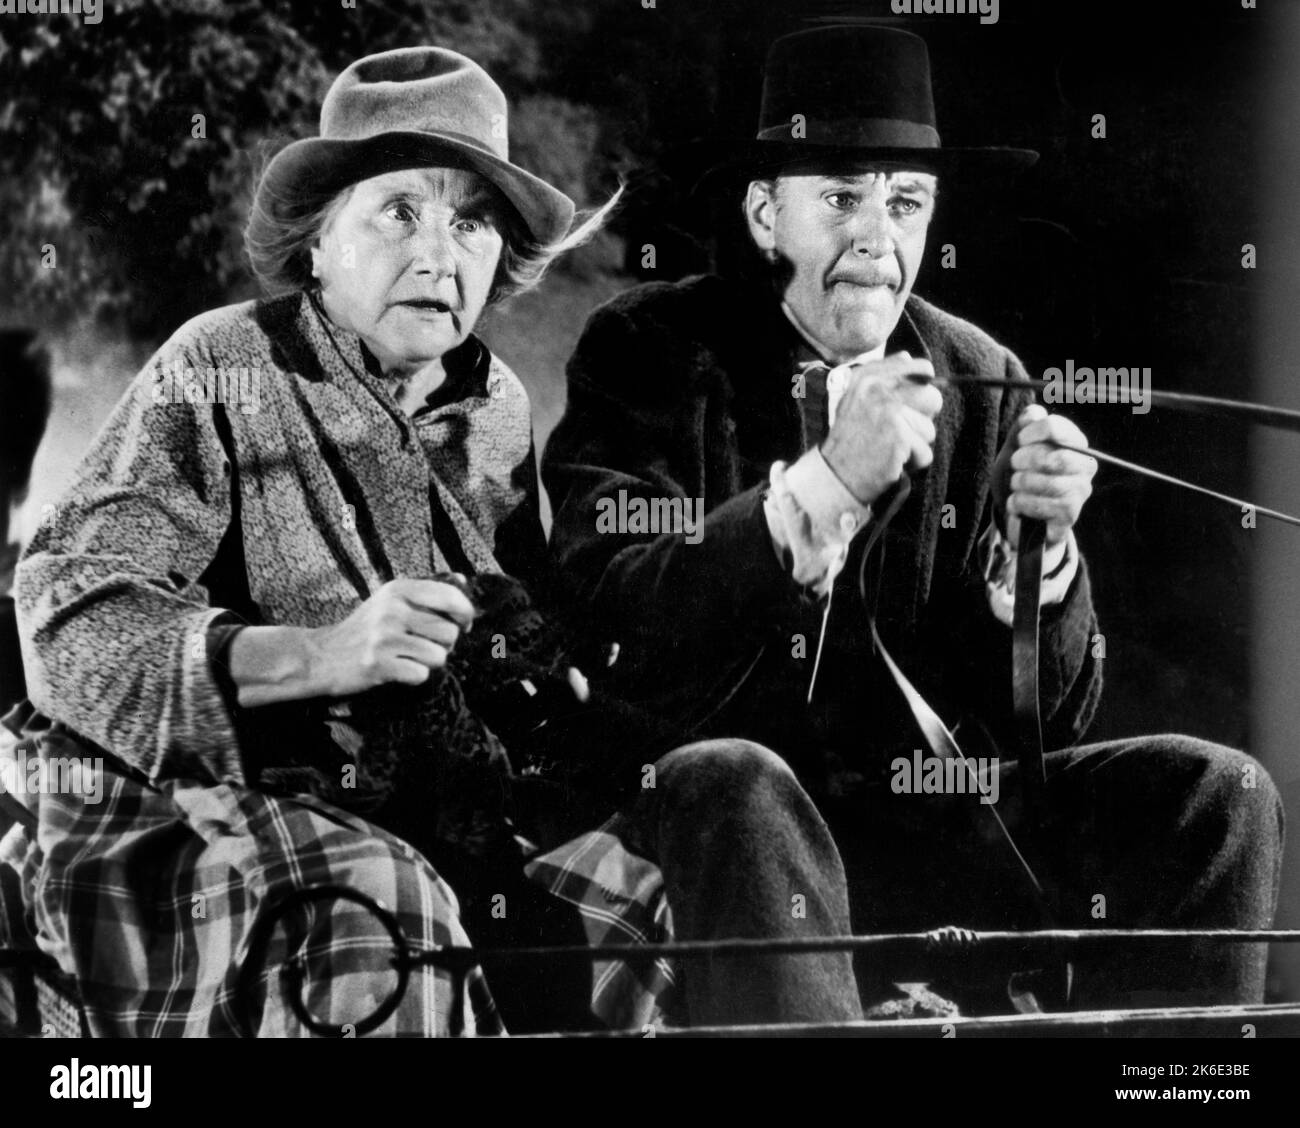 Marjorie Main, Gary Cooper, On-Set of the Film, 'Friendly Persuasion', Allied Artists, 1956 Stockfoto